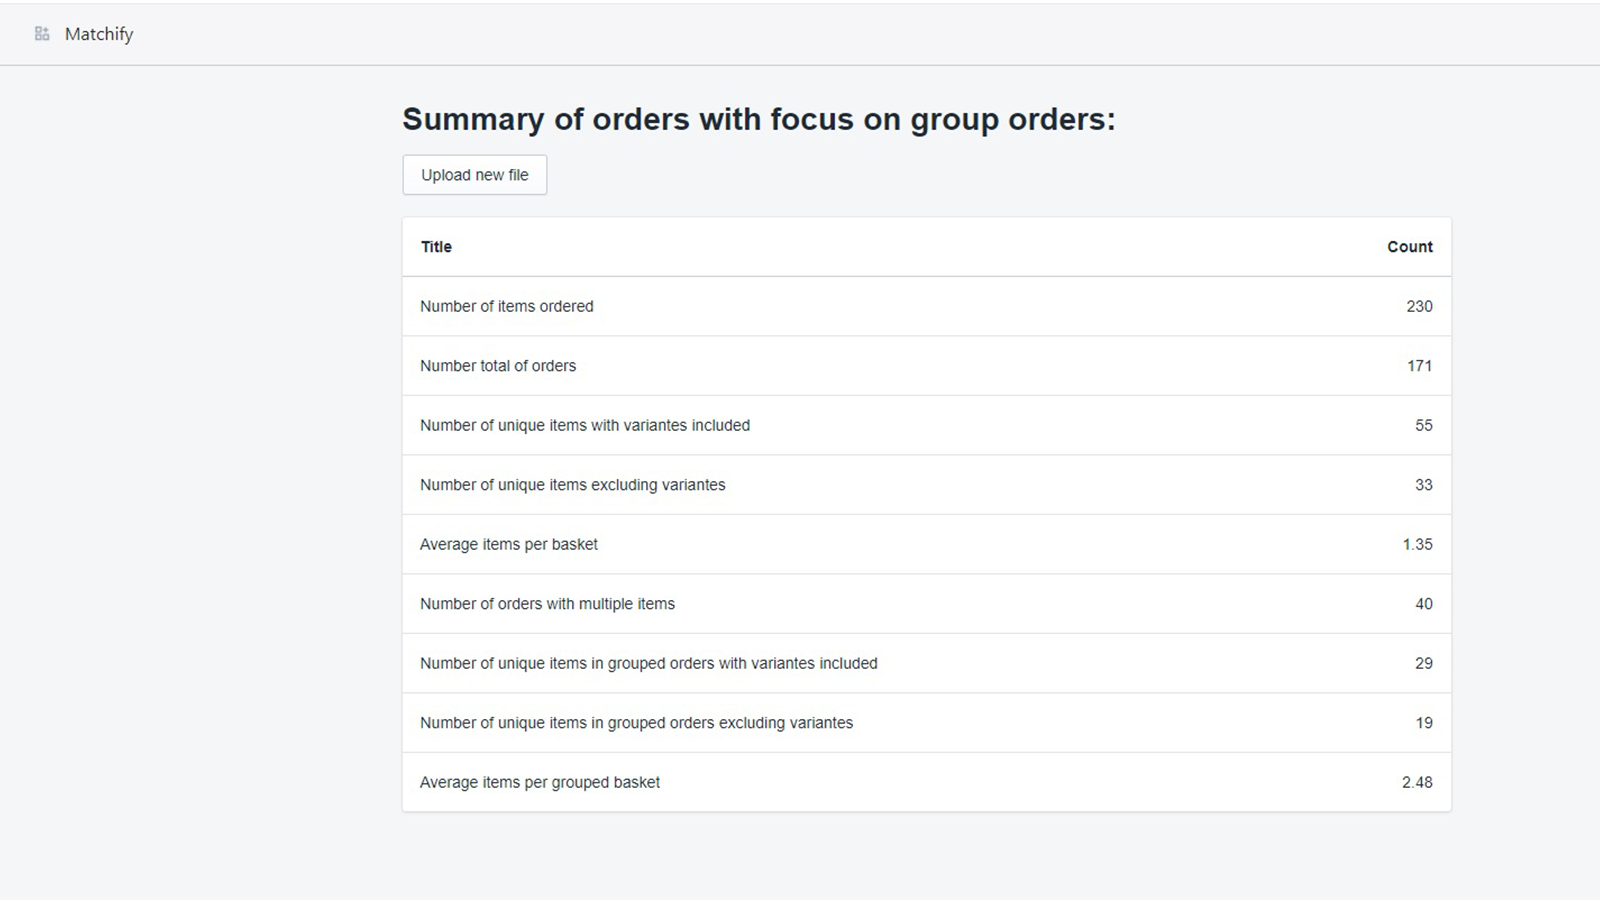 Get summary statistics focusing on orders with multiple items